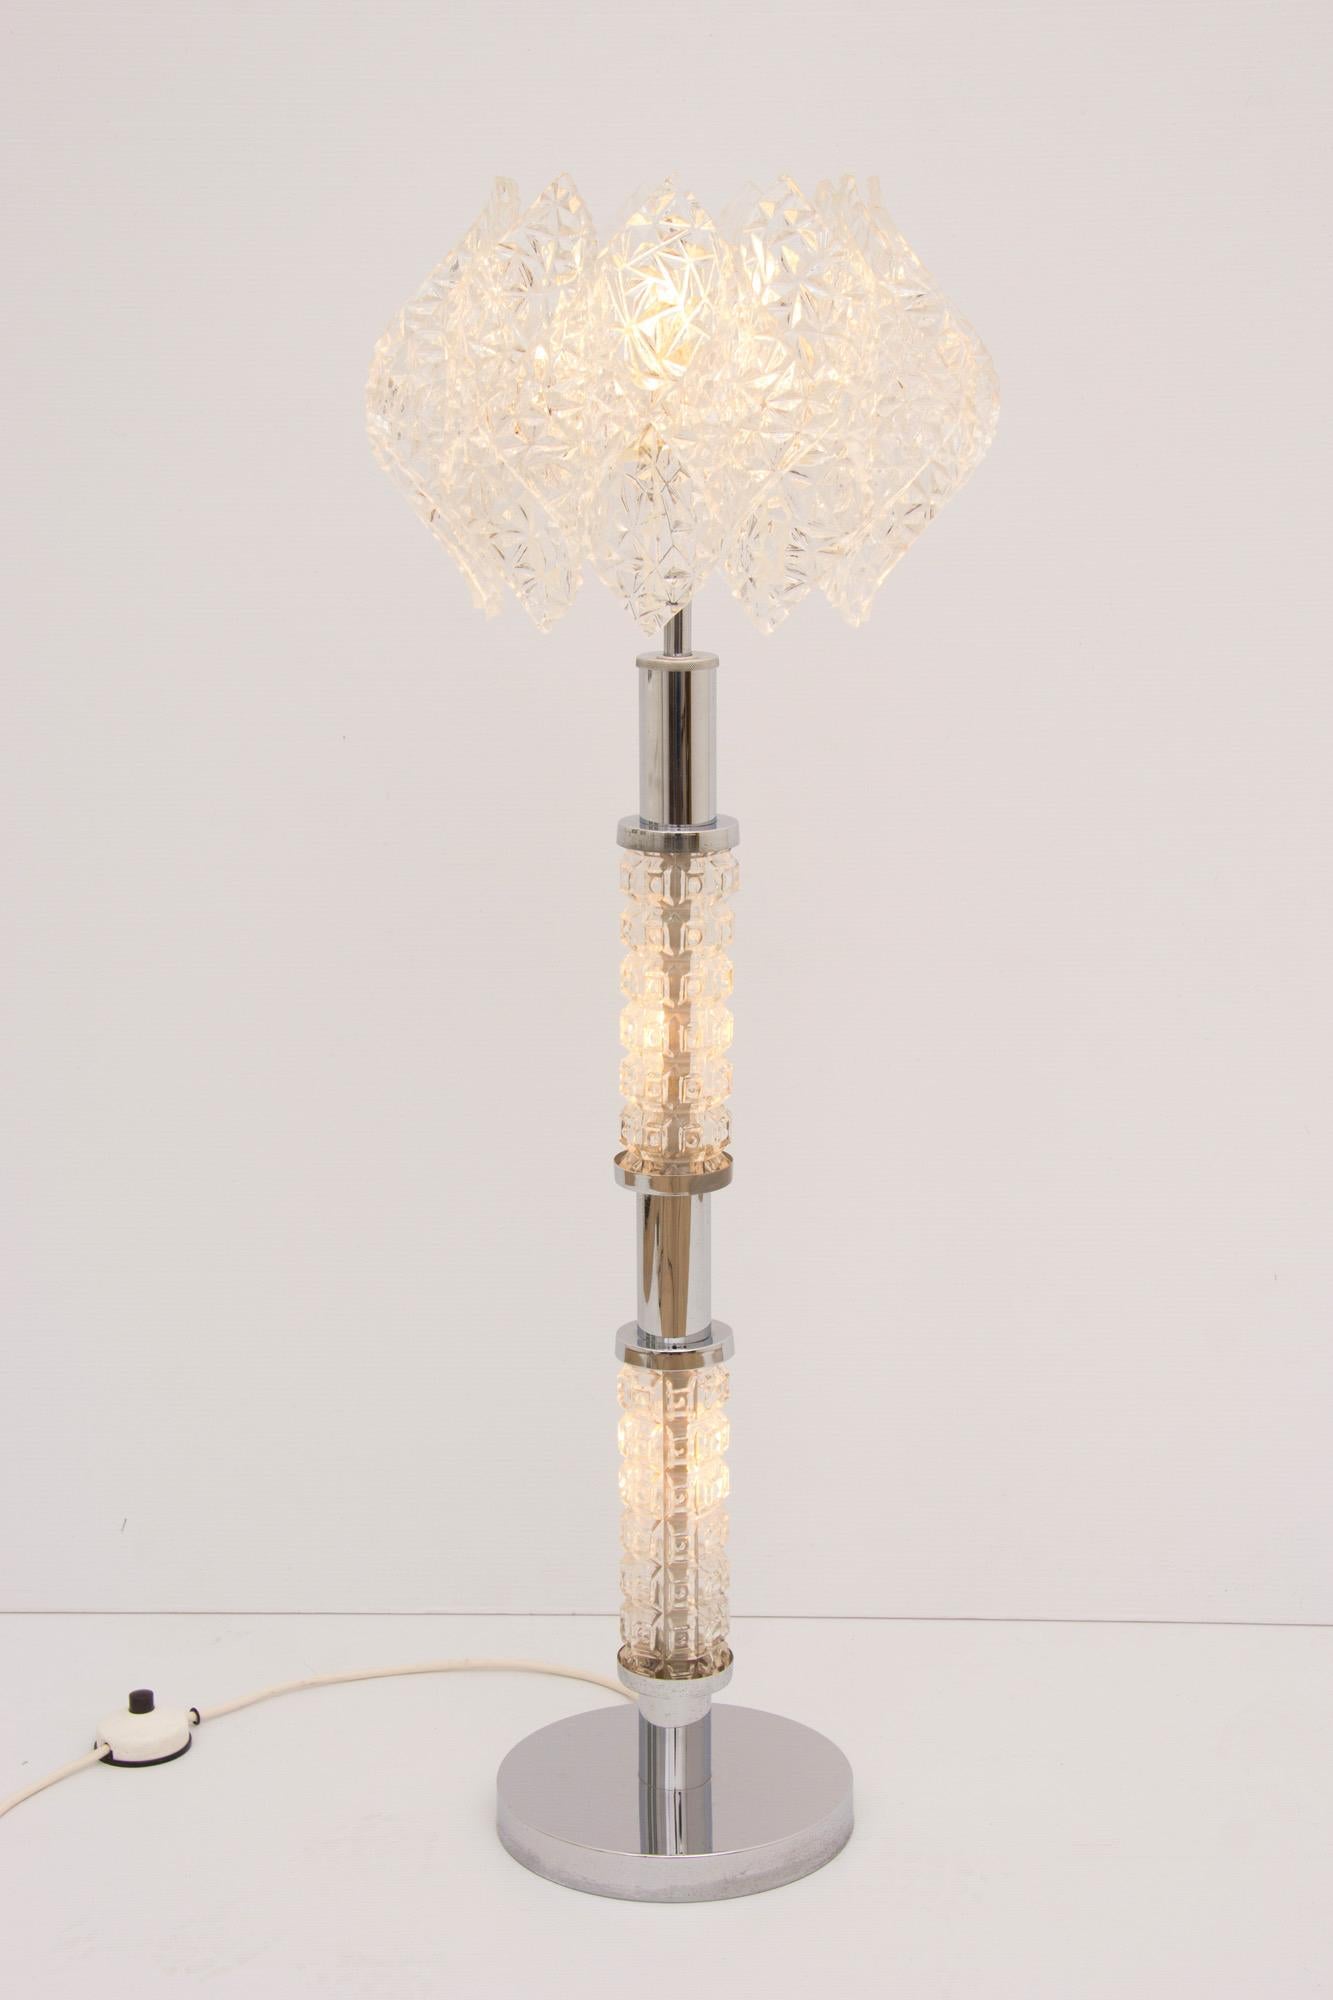 Midcentury floor lamp with chrome and glass column, the two glass cylinders in the column illuminate as well as the acrylic lotus shade.
Measures: H 100 cm x W 36 cm x D 36 cm
West German, circa 1960.